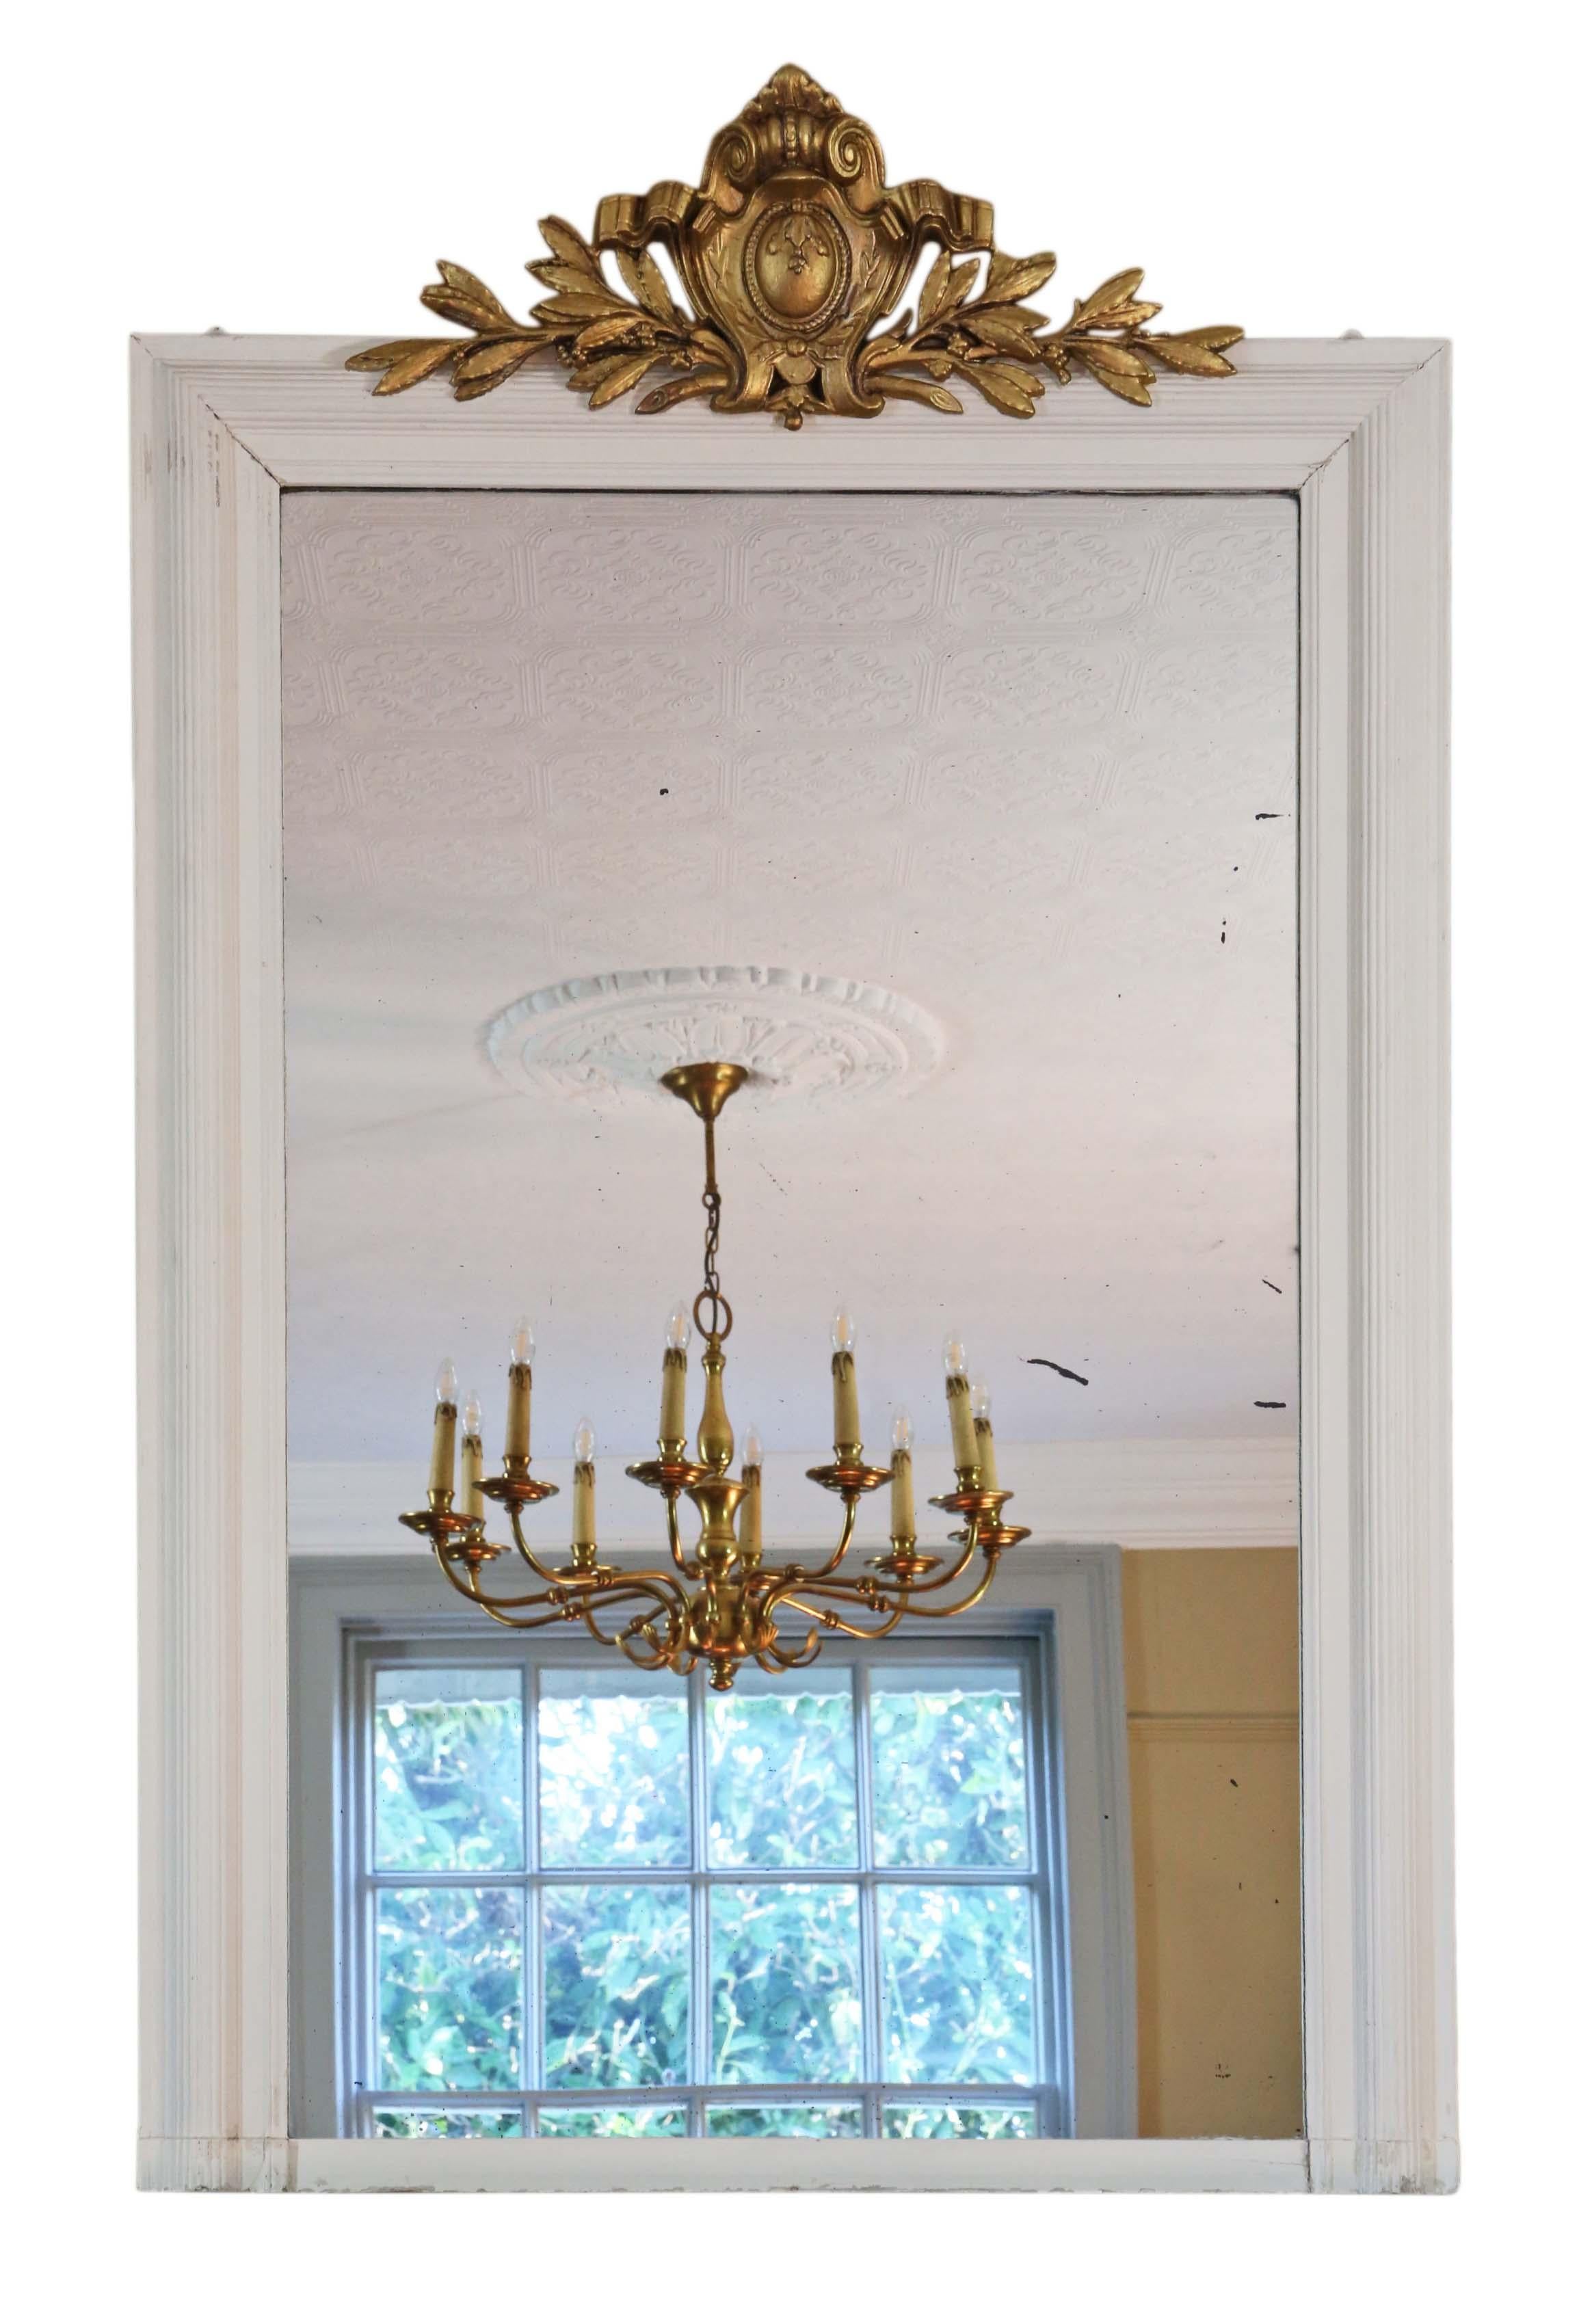 Antique 19th century large quality gilt and white overmantle wall mirror.

An impressive rare find, that would look amazing in the right location. No loose joints or woodworm.

The original mirrored bevel edge glass has light/medium oxidation,